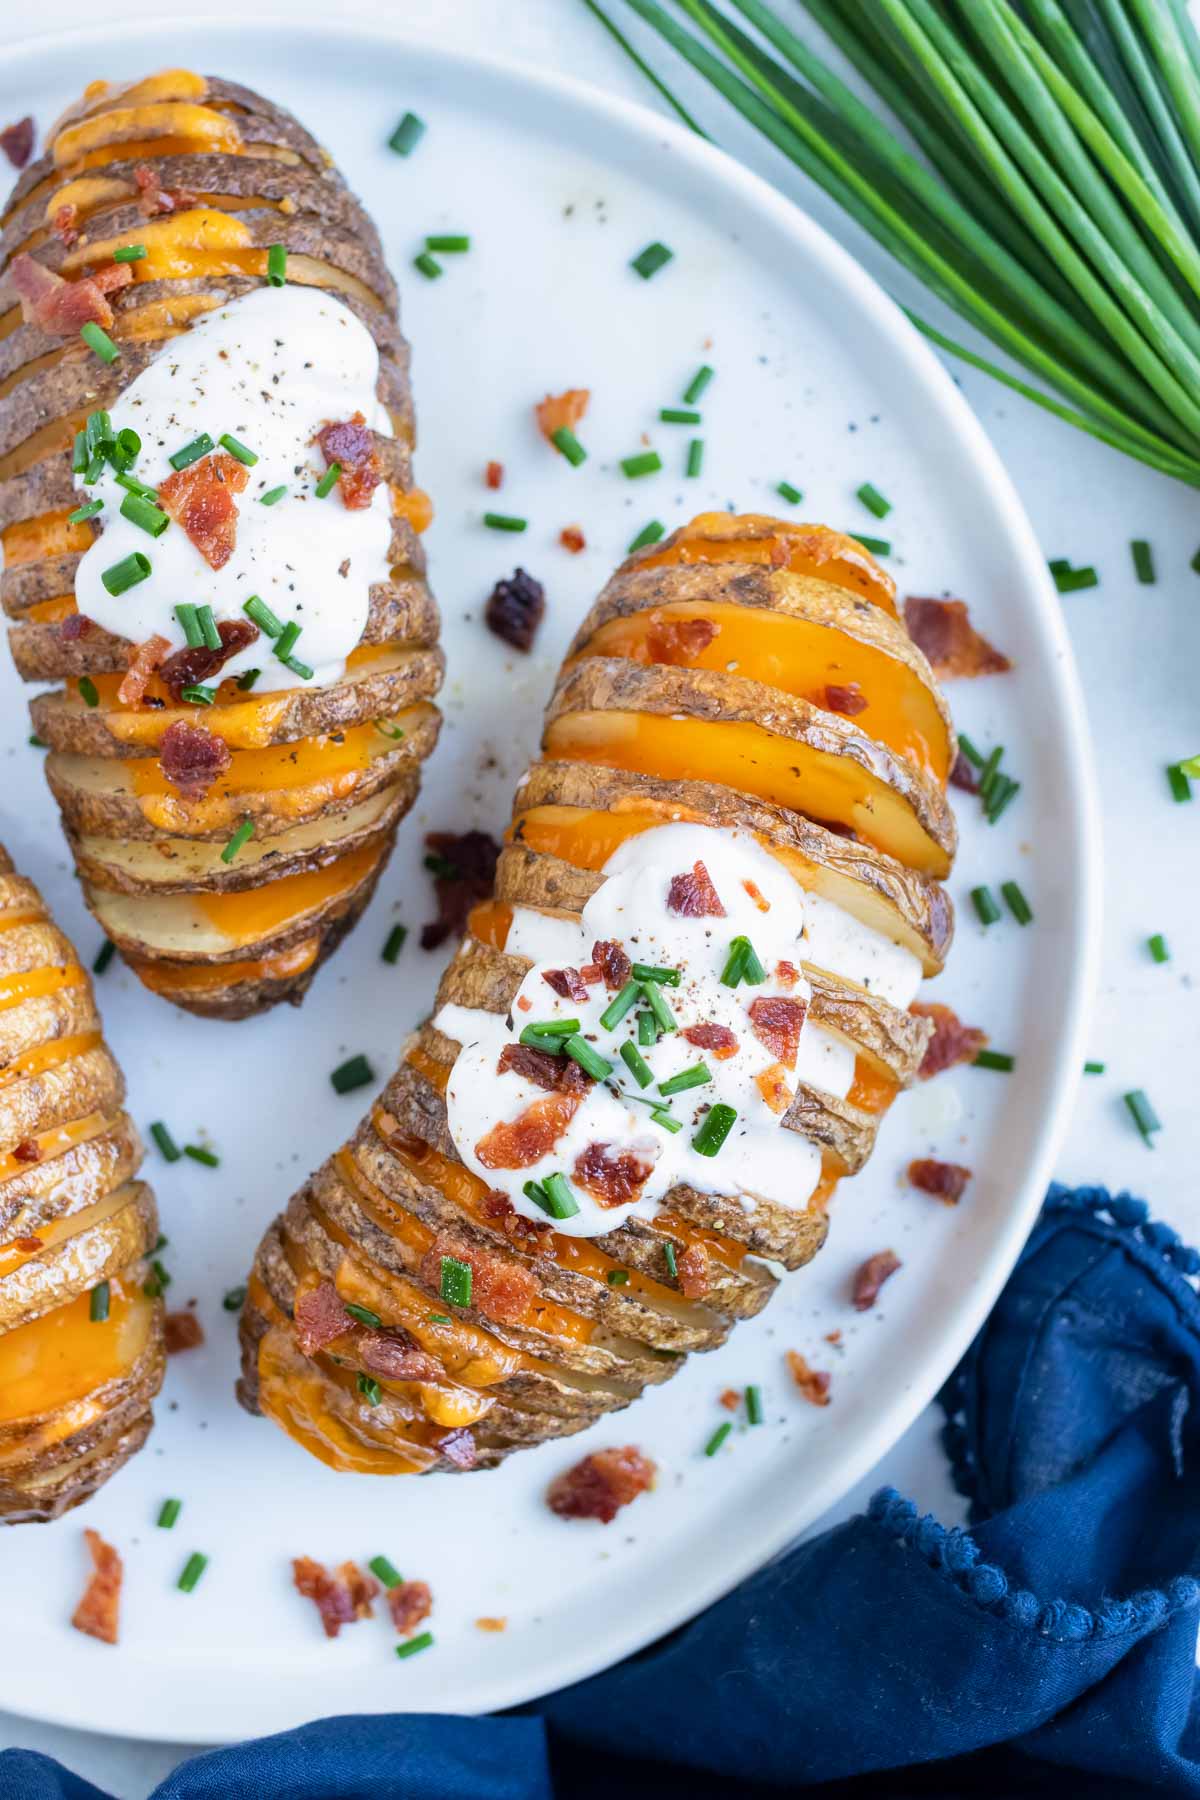 Stuffed hasselback potatoes are erved on a plate for a gluten-free side dish.